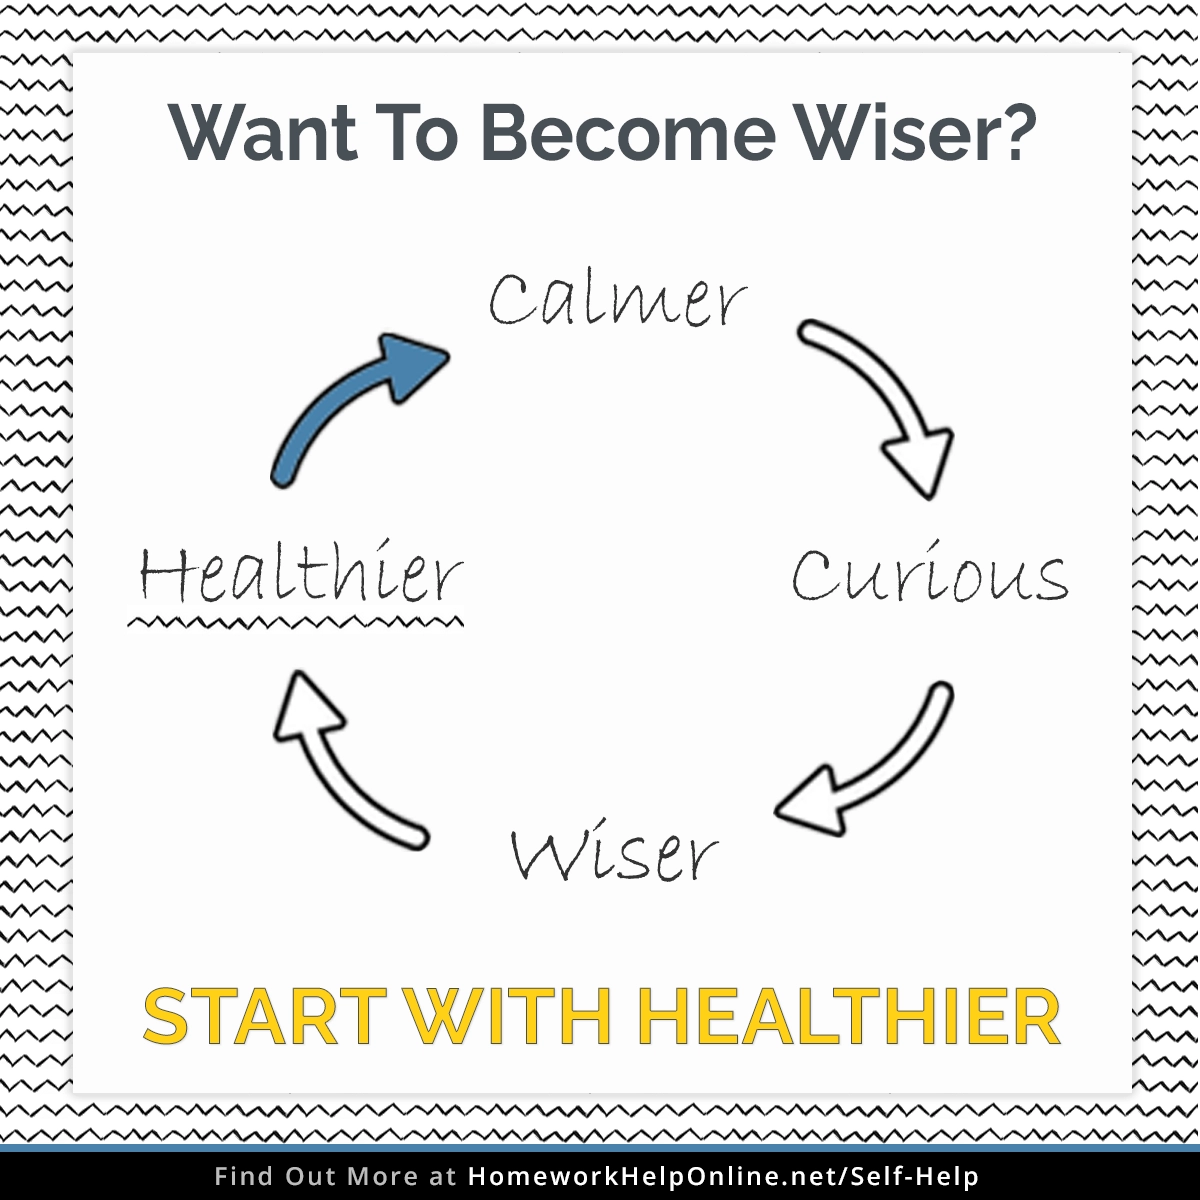 Become wiser by becoming healthier, calmer, and curious.